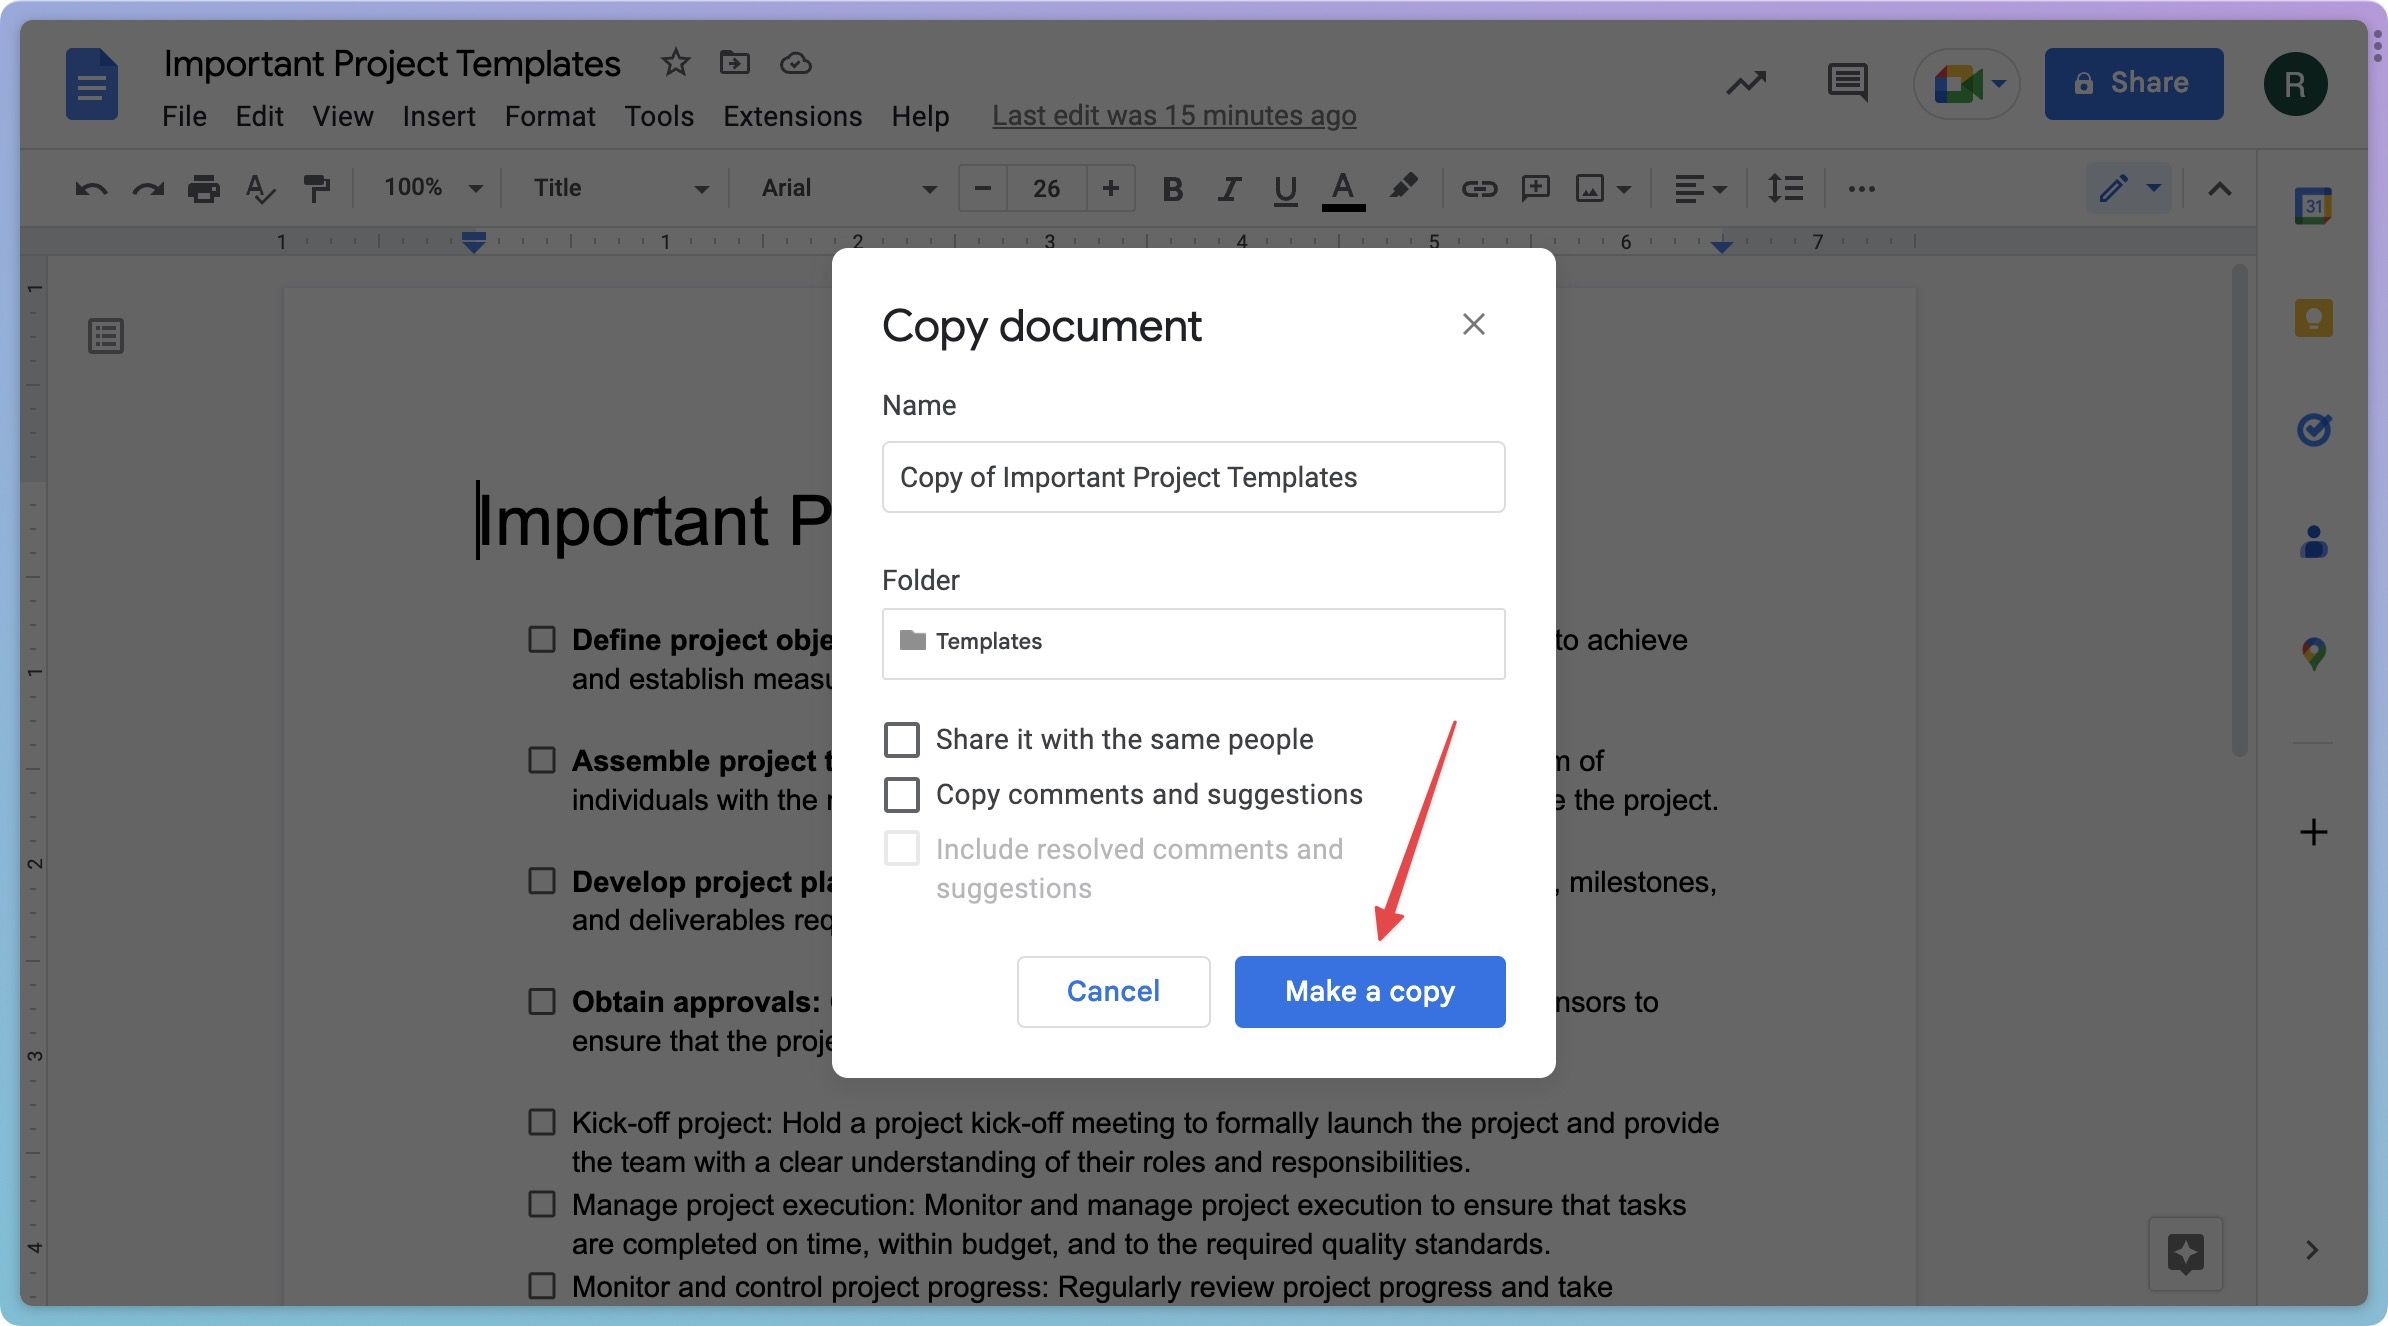 Screenshot showing the final step to make a copy of a document